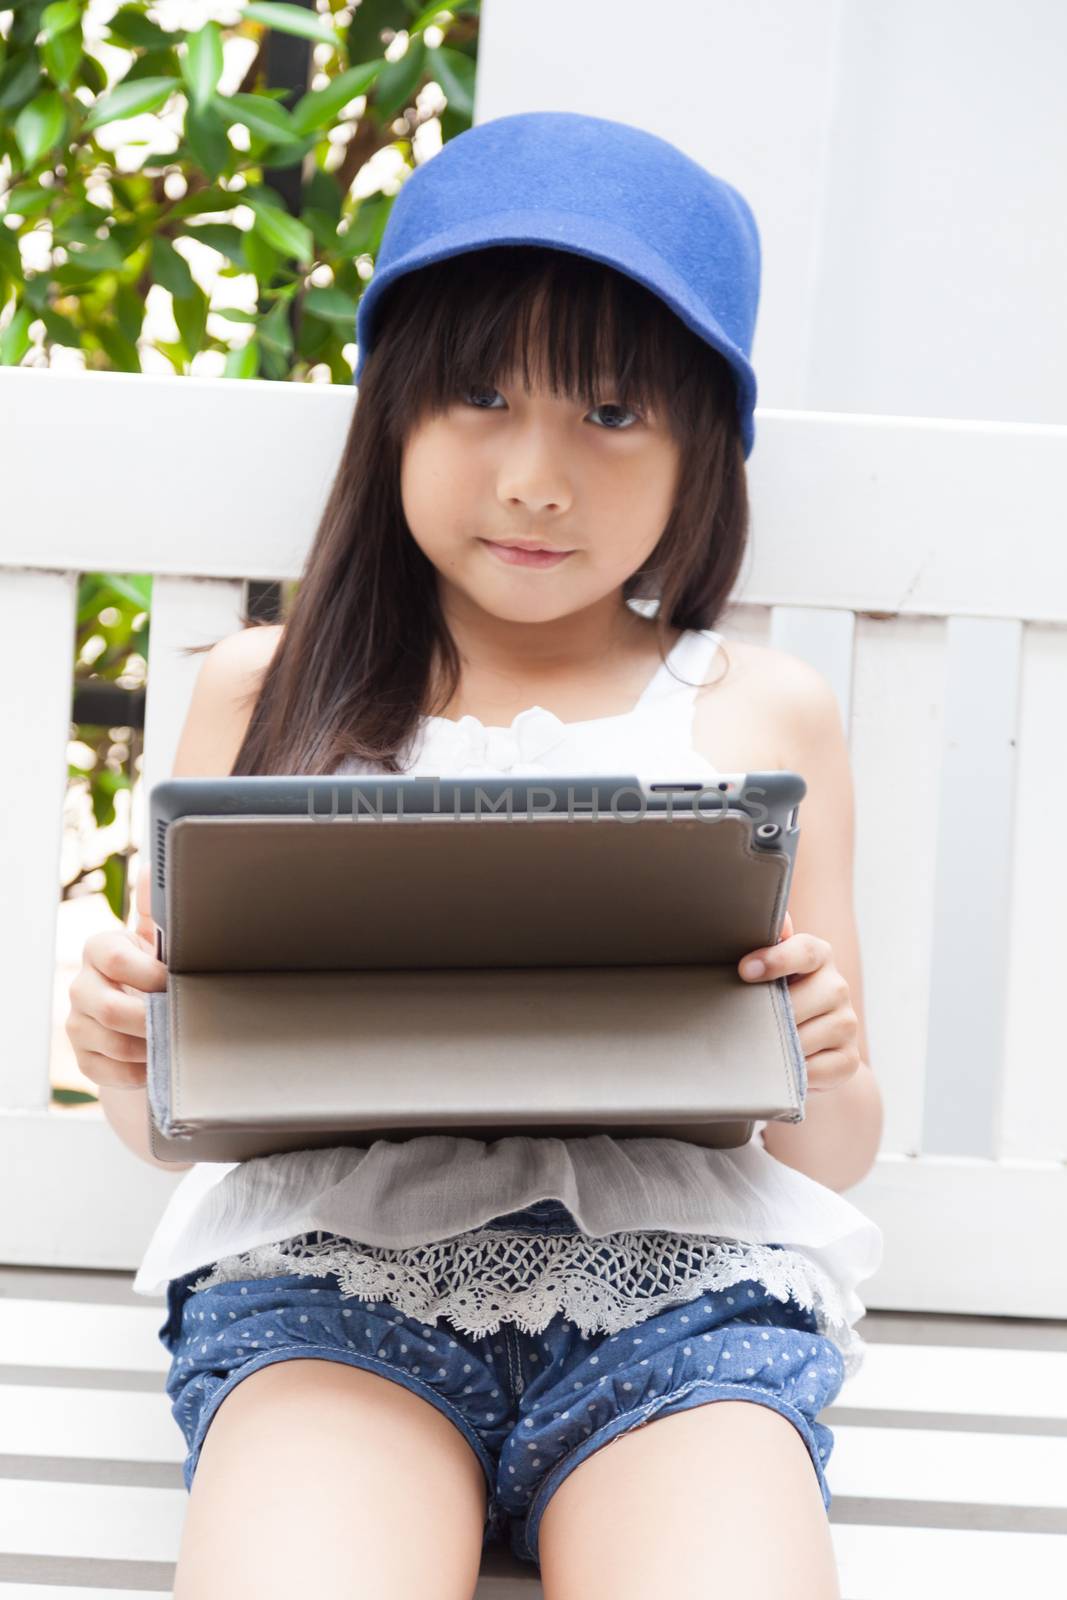 Girl playing with tablet on bench. by a454